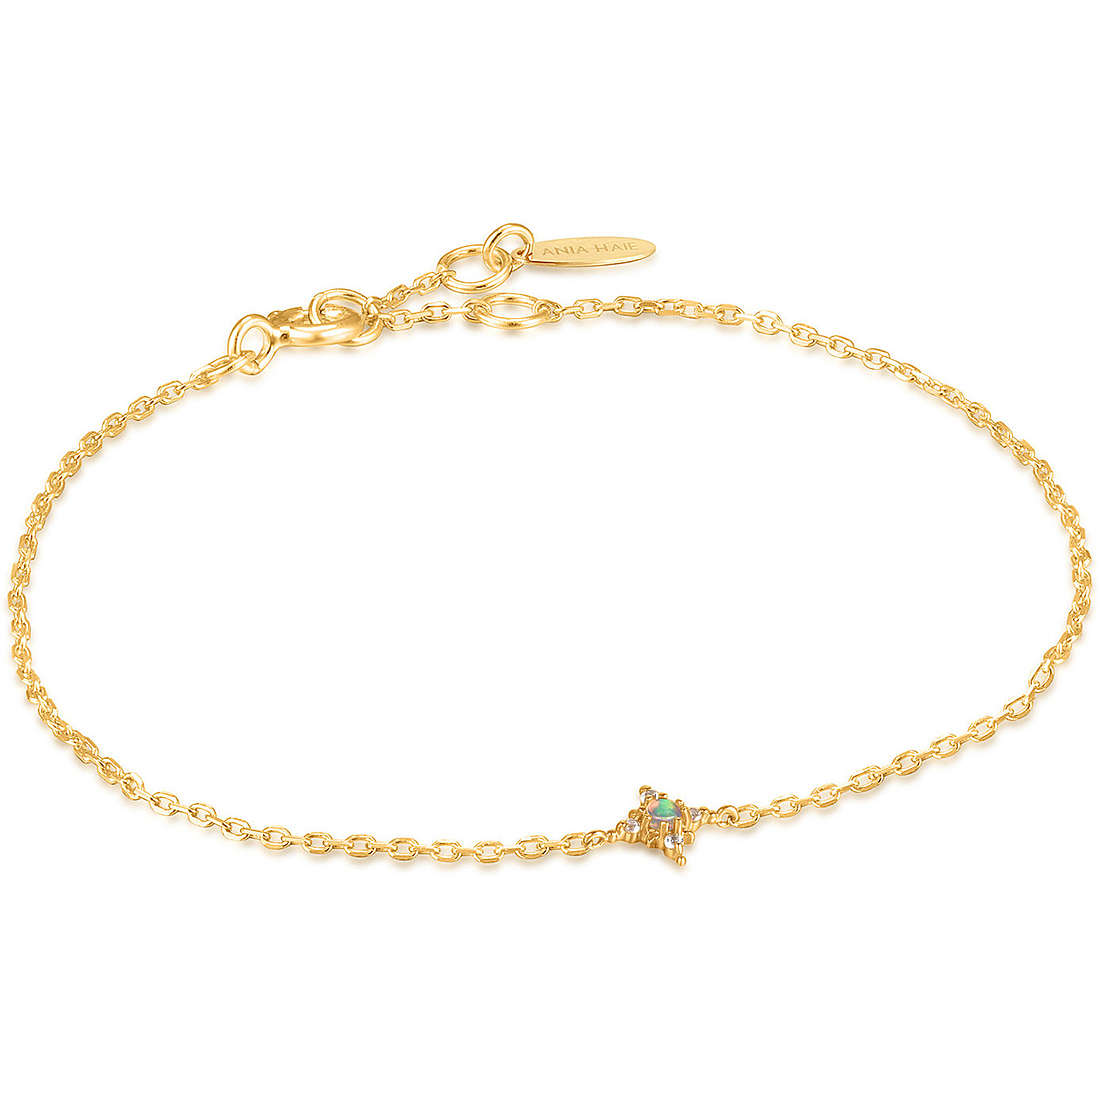 Ania Haie Gold Collection bracelet woman Bracelet with 14kt Gold Chain jewel BAU001-01YG